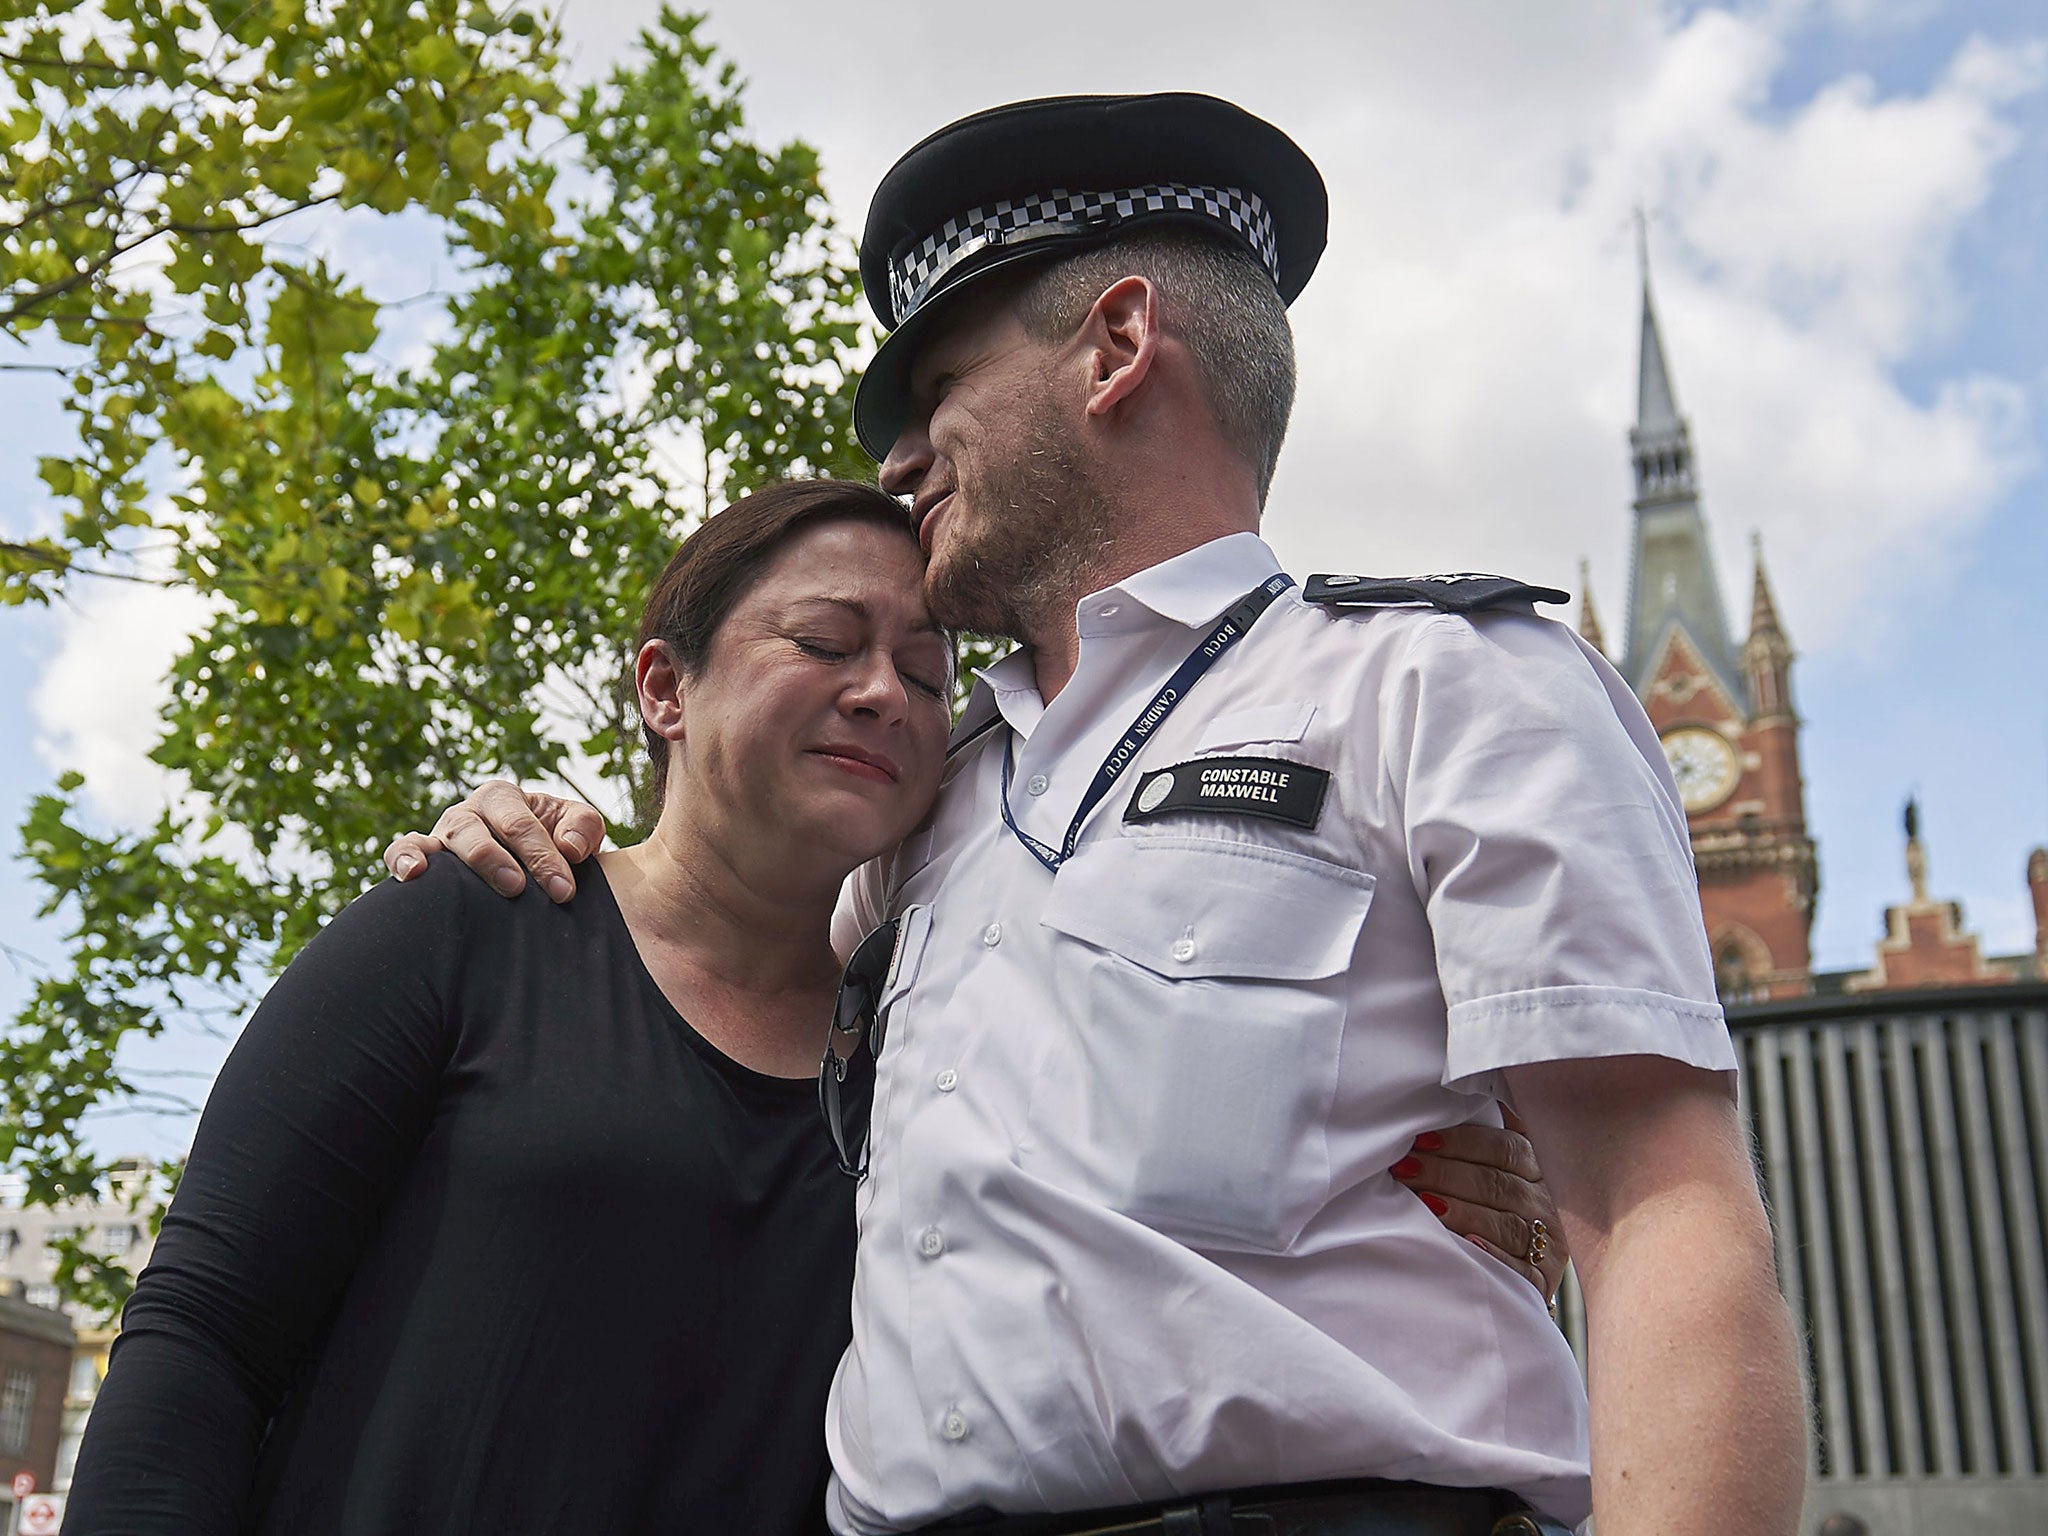 Gill Hicks, (L) a survivor of the 7/7 London terror attacks, embraces police constable Andrew Maxwell outside Kings Cross Station